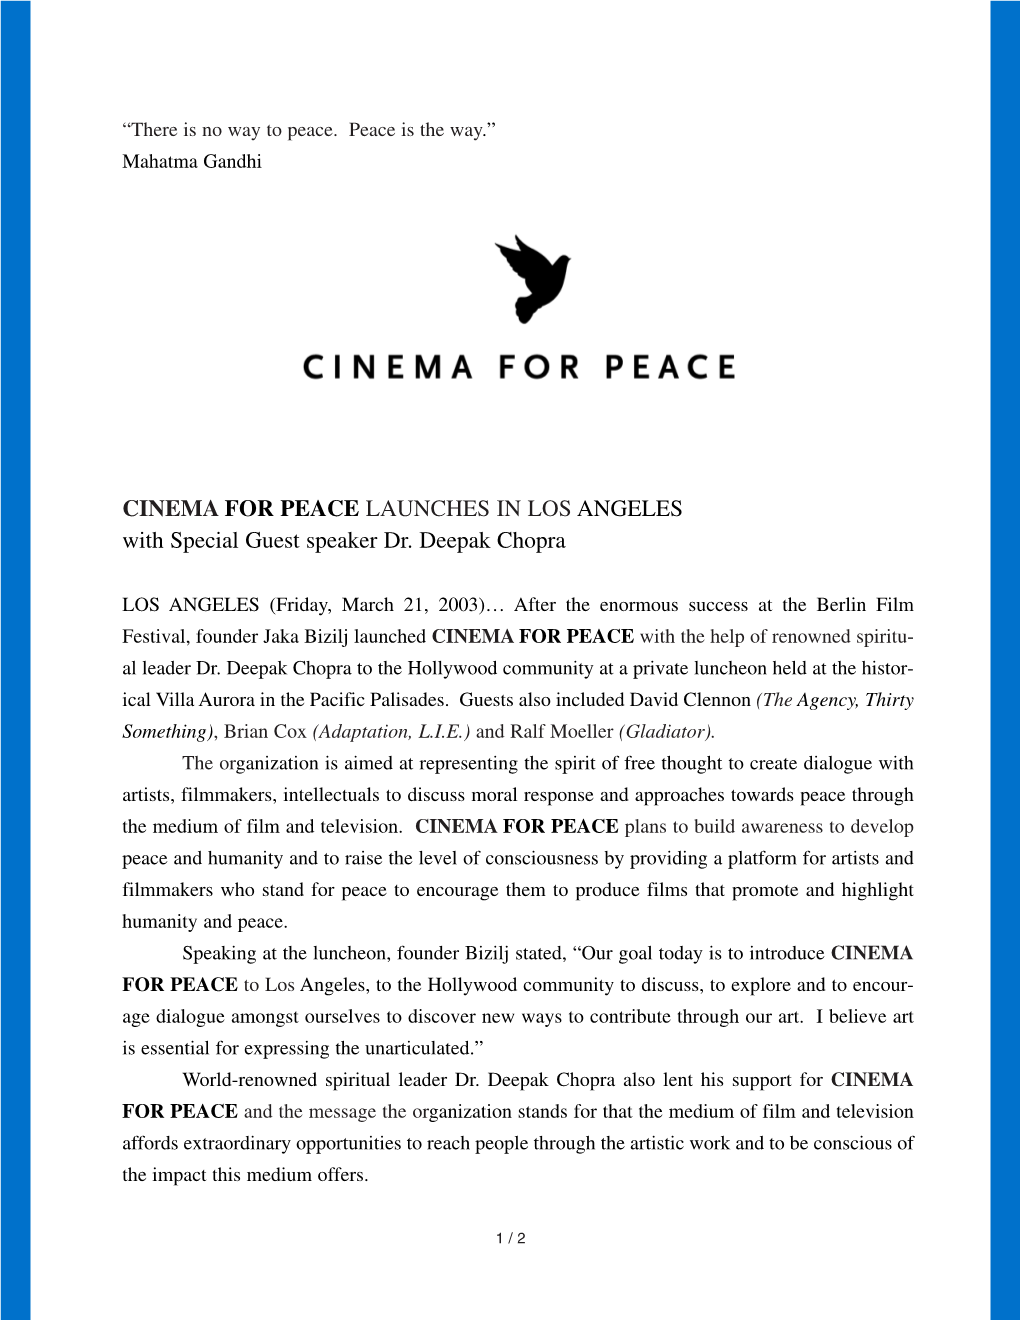 CINEMA for PEACE LAUNCHES in LOS ANGELES with Special Guest Speaker Dr